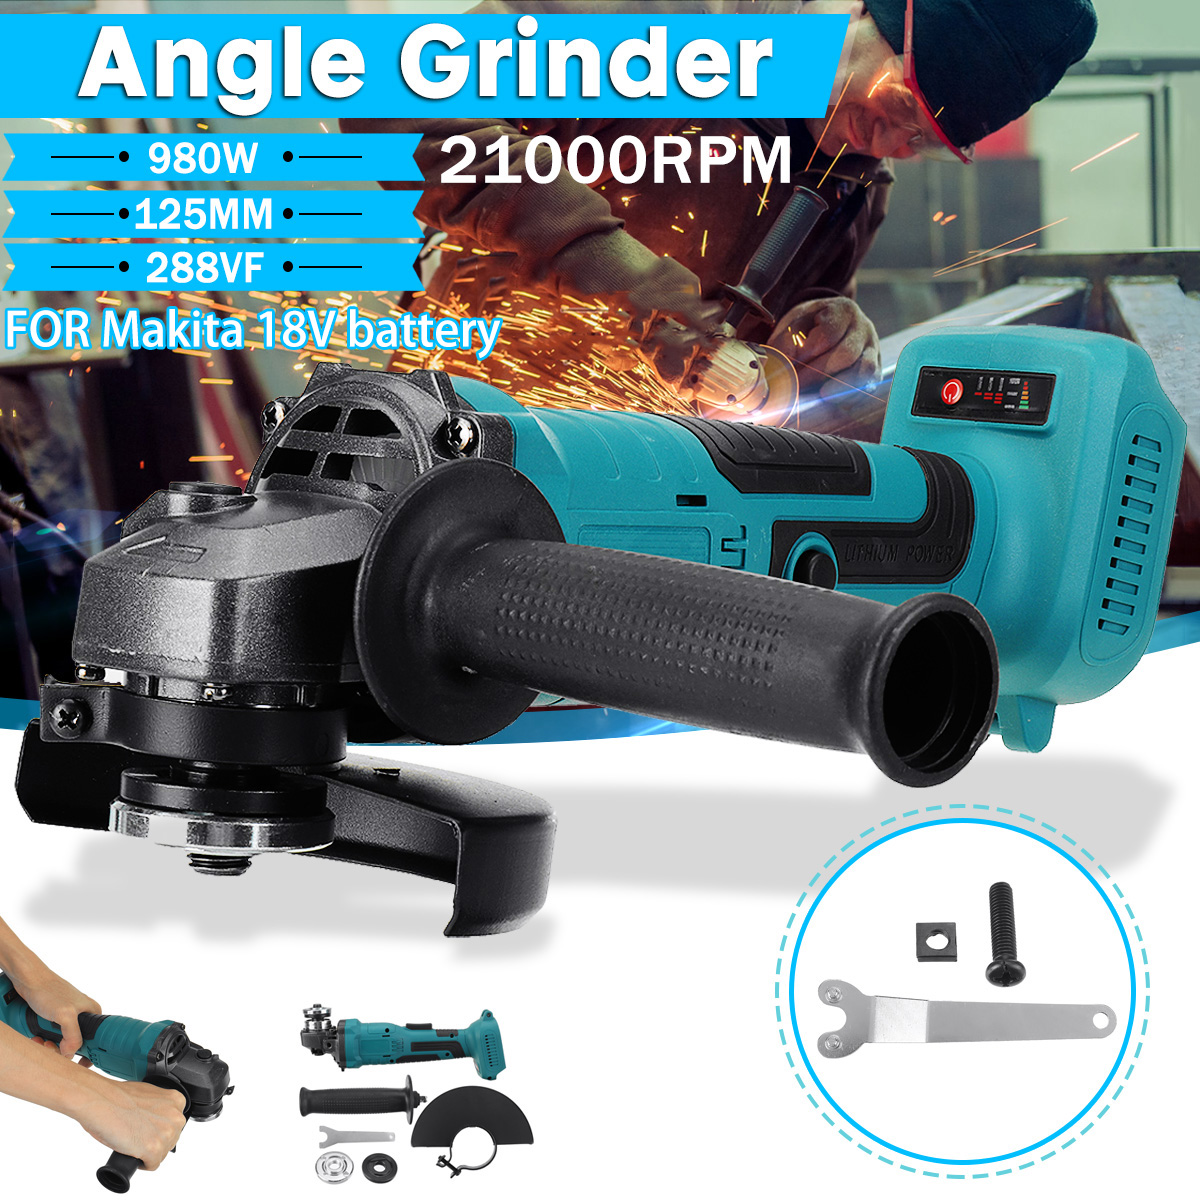 100125mm-Brushless-Cordless-Angle-Grinder-Polisher-Cutting-Tool-W-None12-Battery-For-Makiita-1867833-1